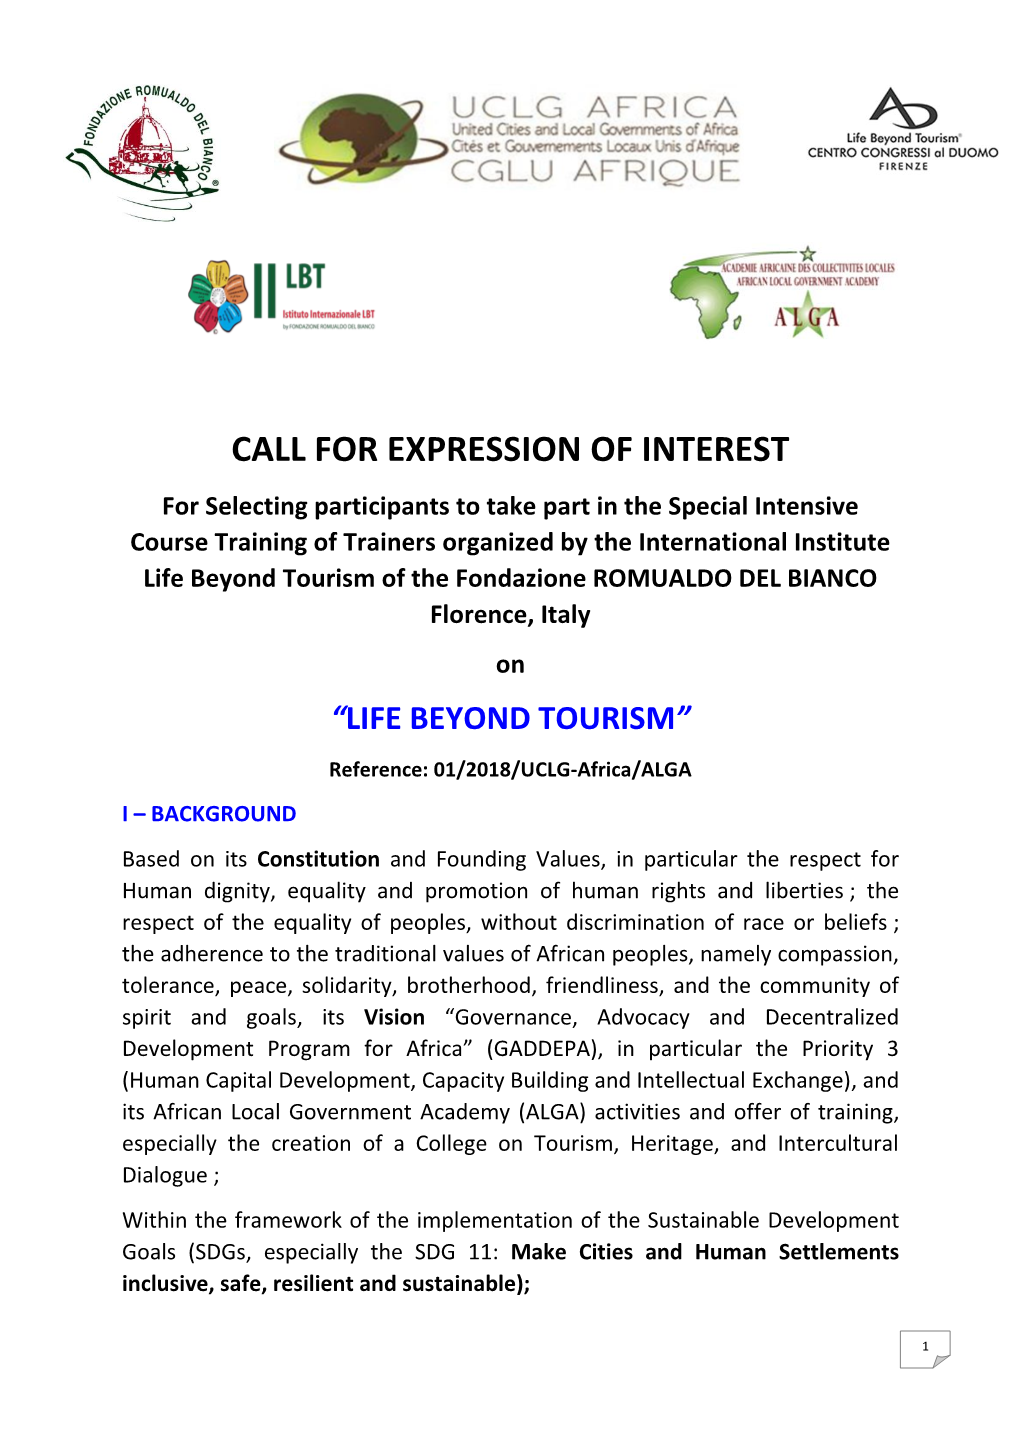 Call for Expression of Interest-Life Beyond Tourism